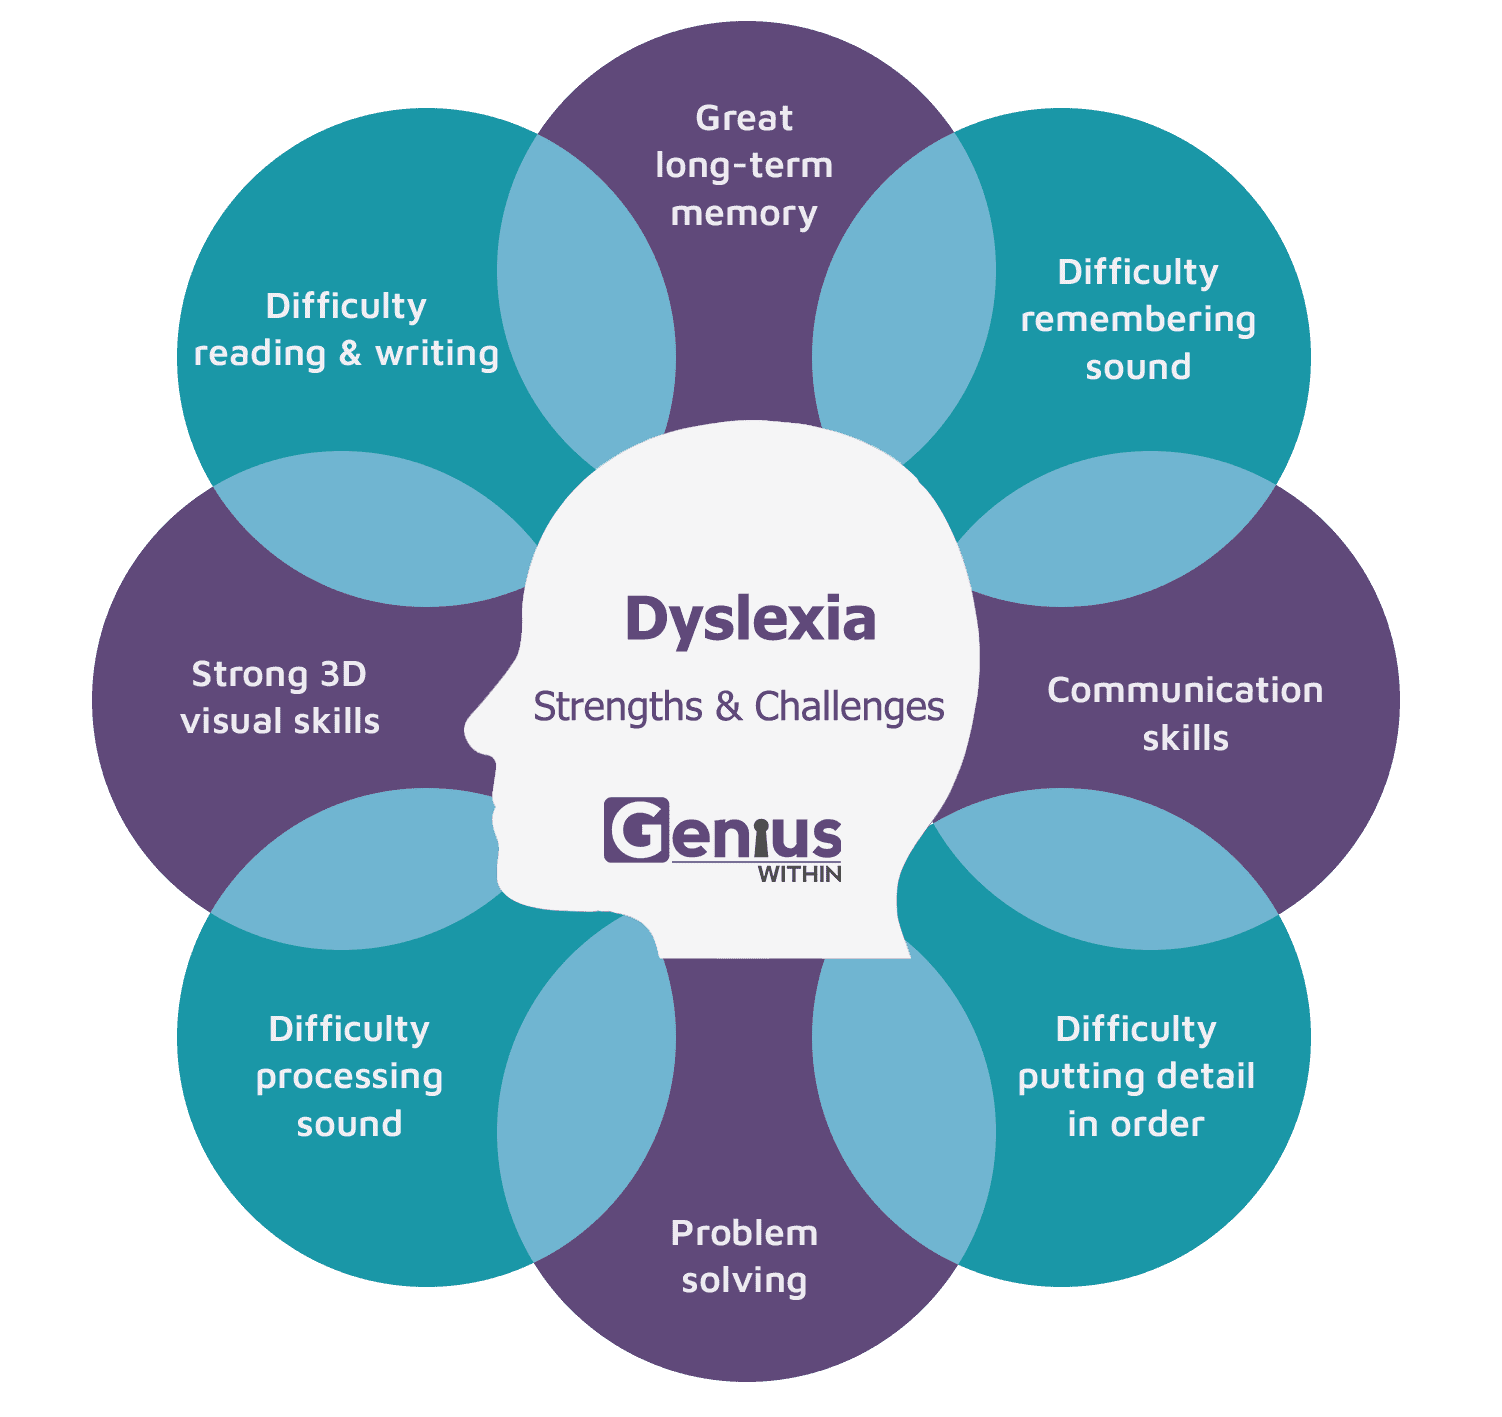 Info graphic with head at the centre and overlapping text bubbles in a circle around it. Title reads: Dyslexia, strengths and challenges. The strengths and challenges are listed as follows; Great long-term memory, difficulty remembering sound, communication skills, difficulty putting detail in order, problem solving, difficulty processing sound, strong 3D visual skills, difficulty reading and writing.